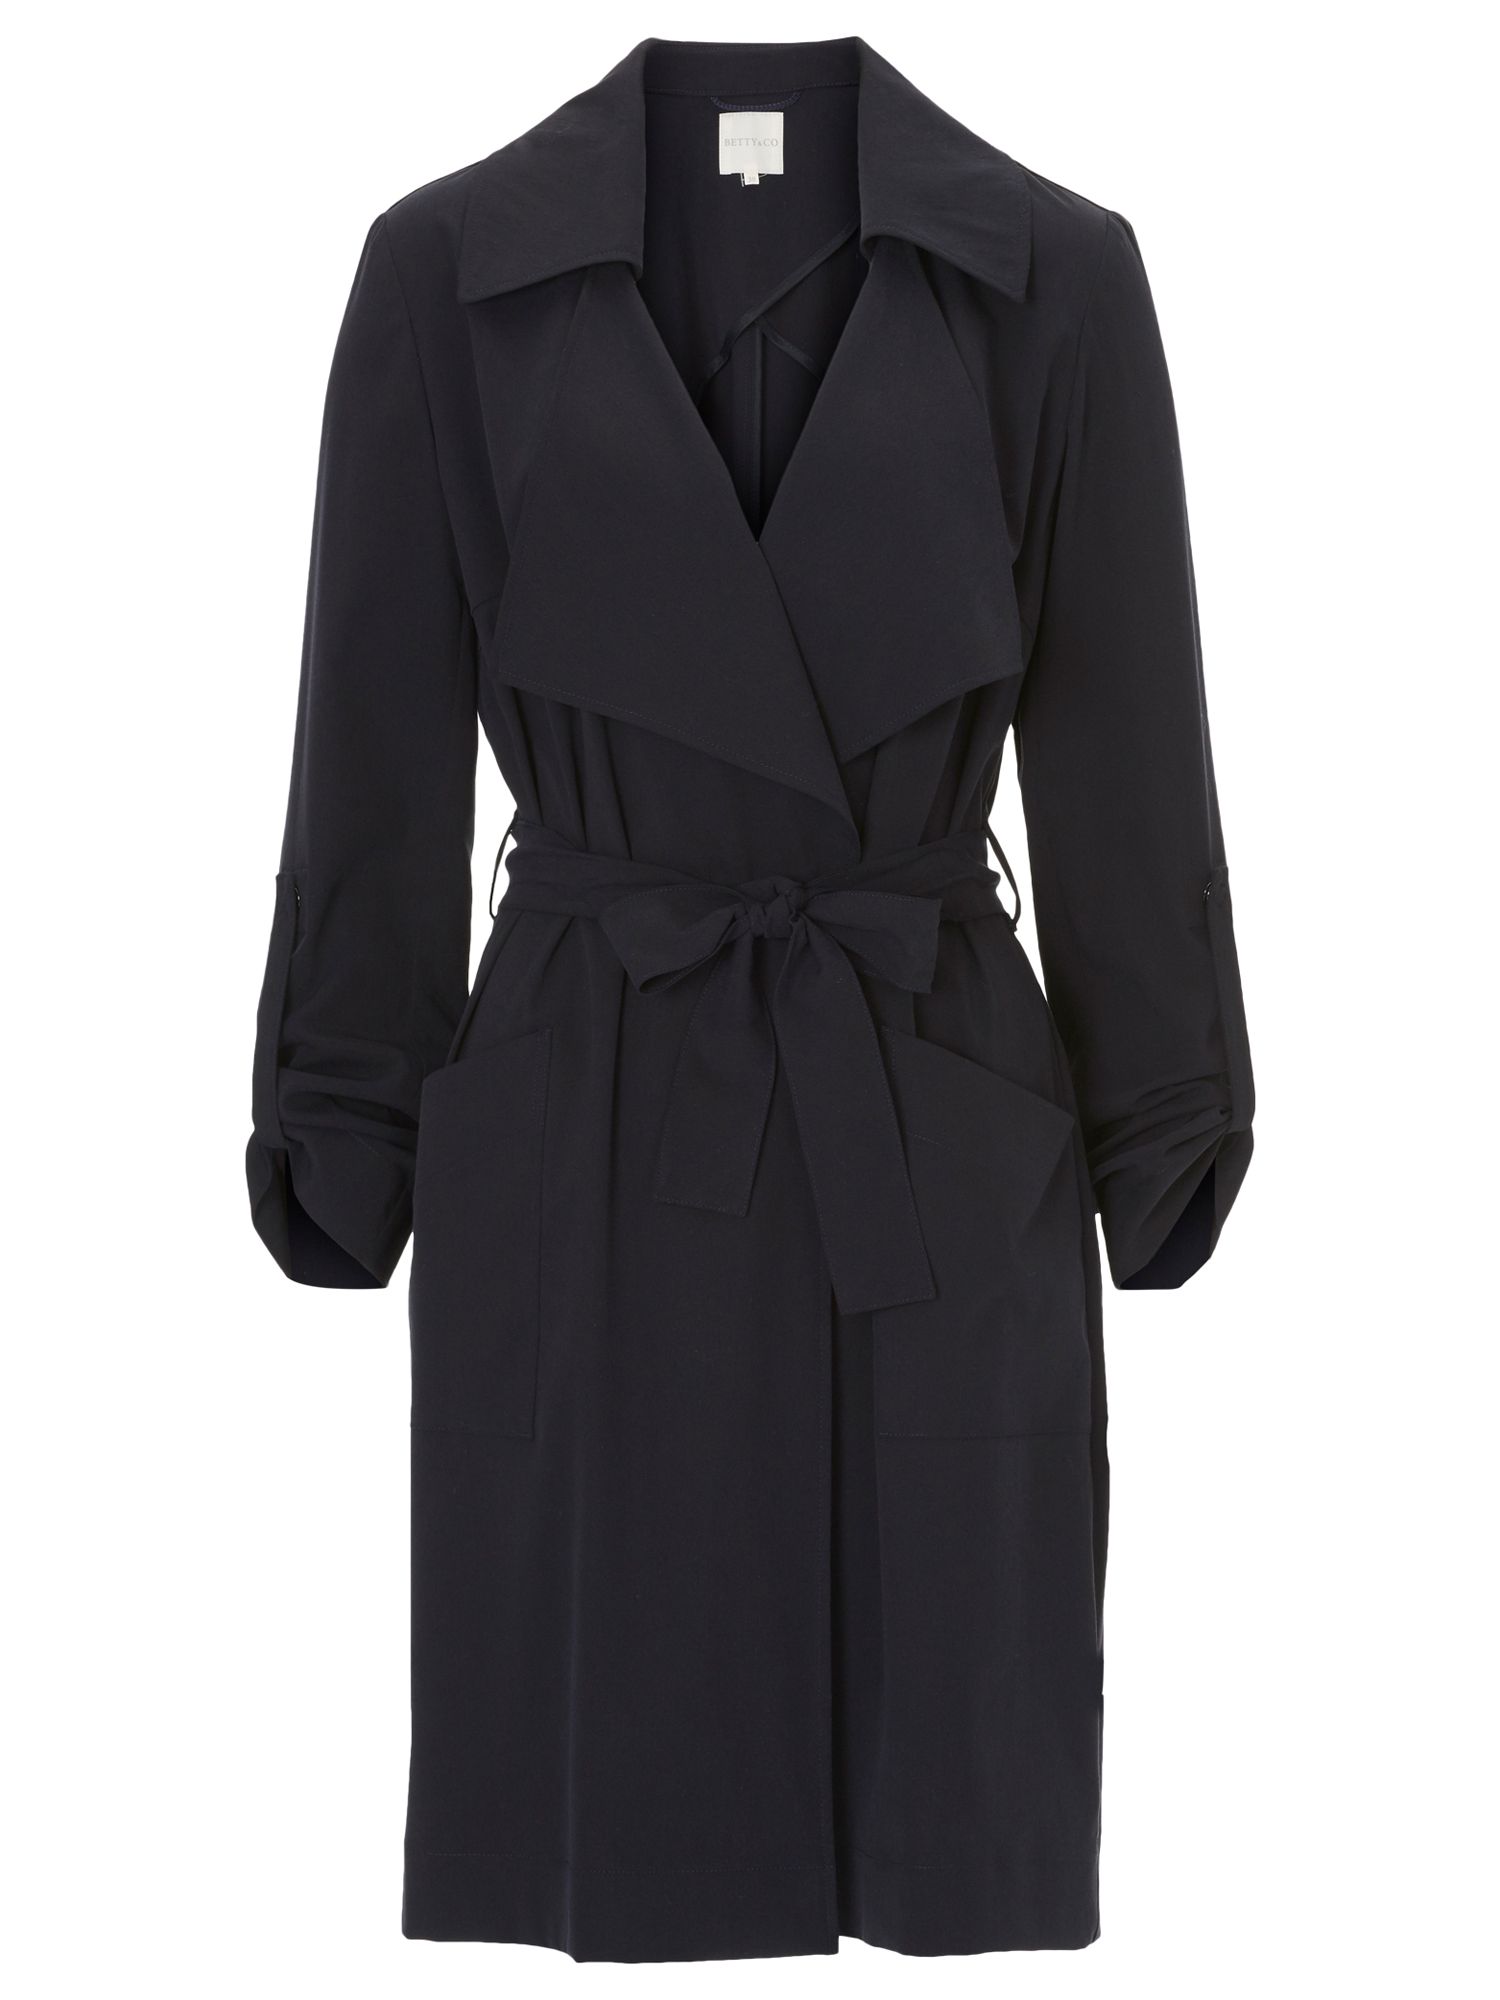 Betty Barclay Unlined Trench Coat, Dark Sapphire at John Lewis & Partners